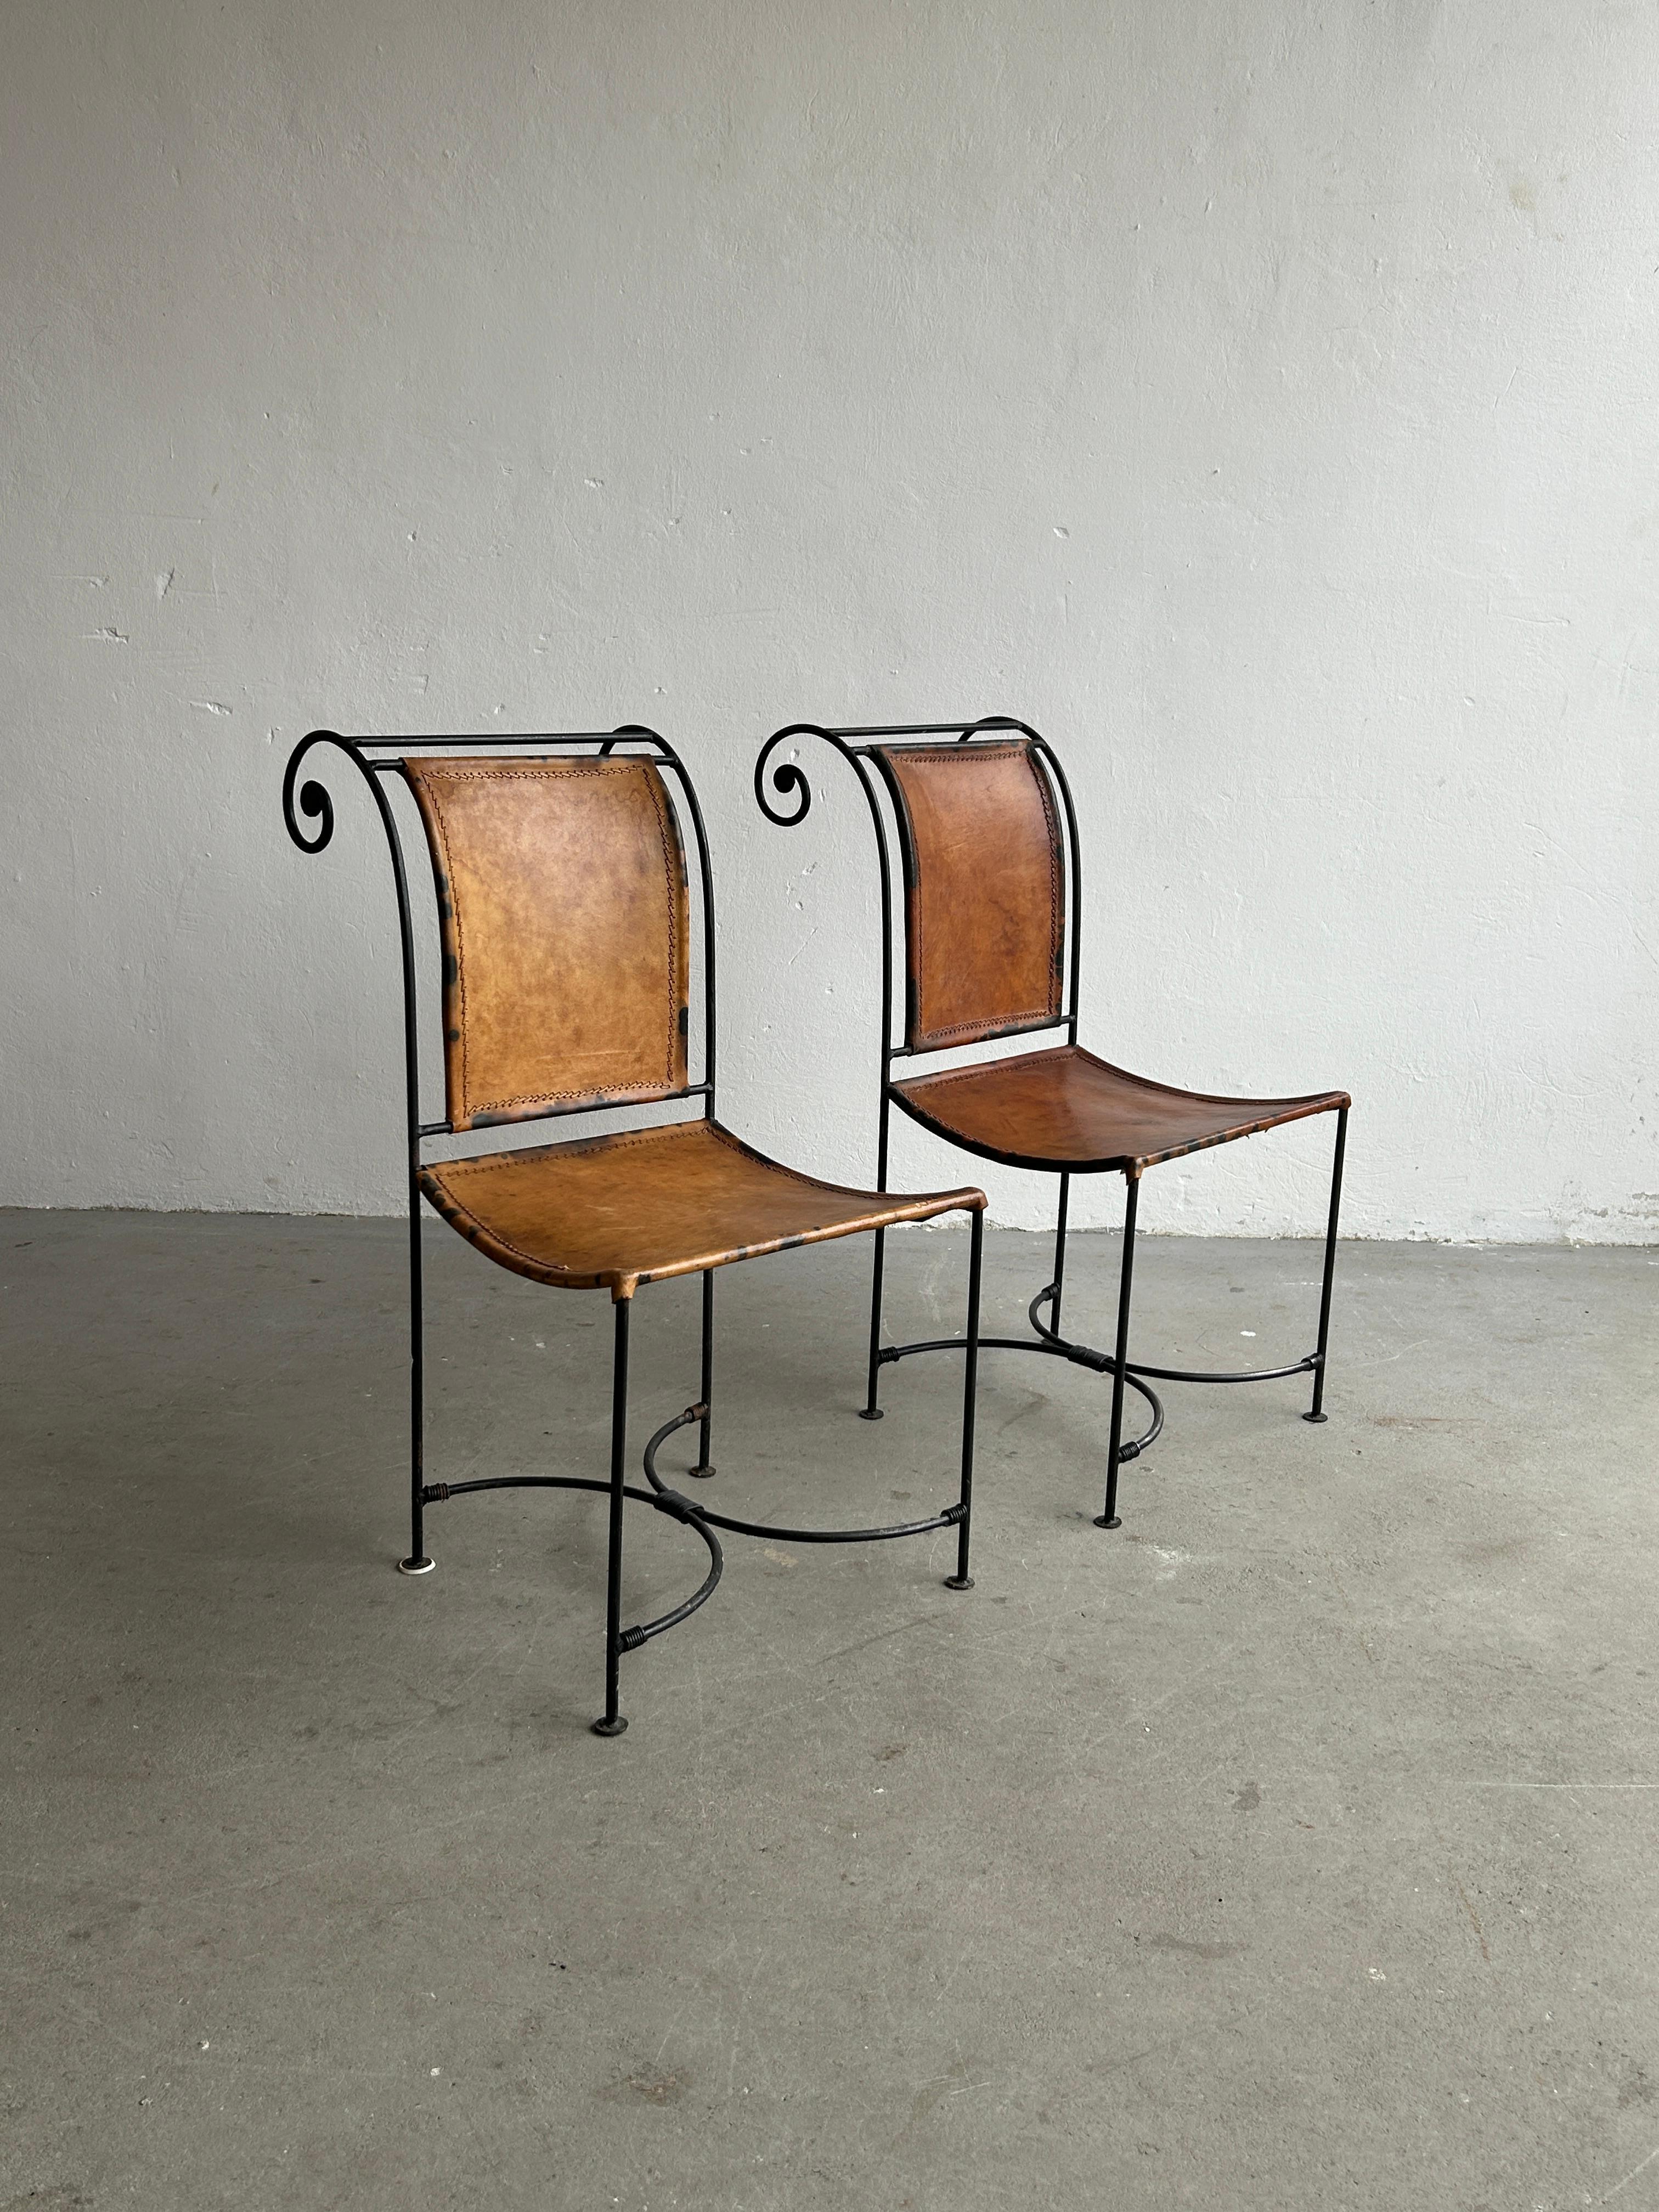 A pair of vintage sculptural accent chairs, made from swirl shaped wrought iron and thick leather seat and backrest, 1950s handcrafted production following the Mediterranean or Spanish Colonial design style.

In original vintage condition, with